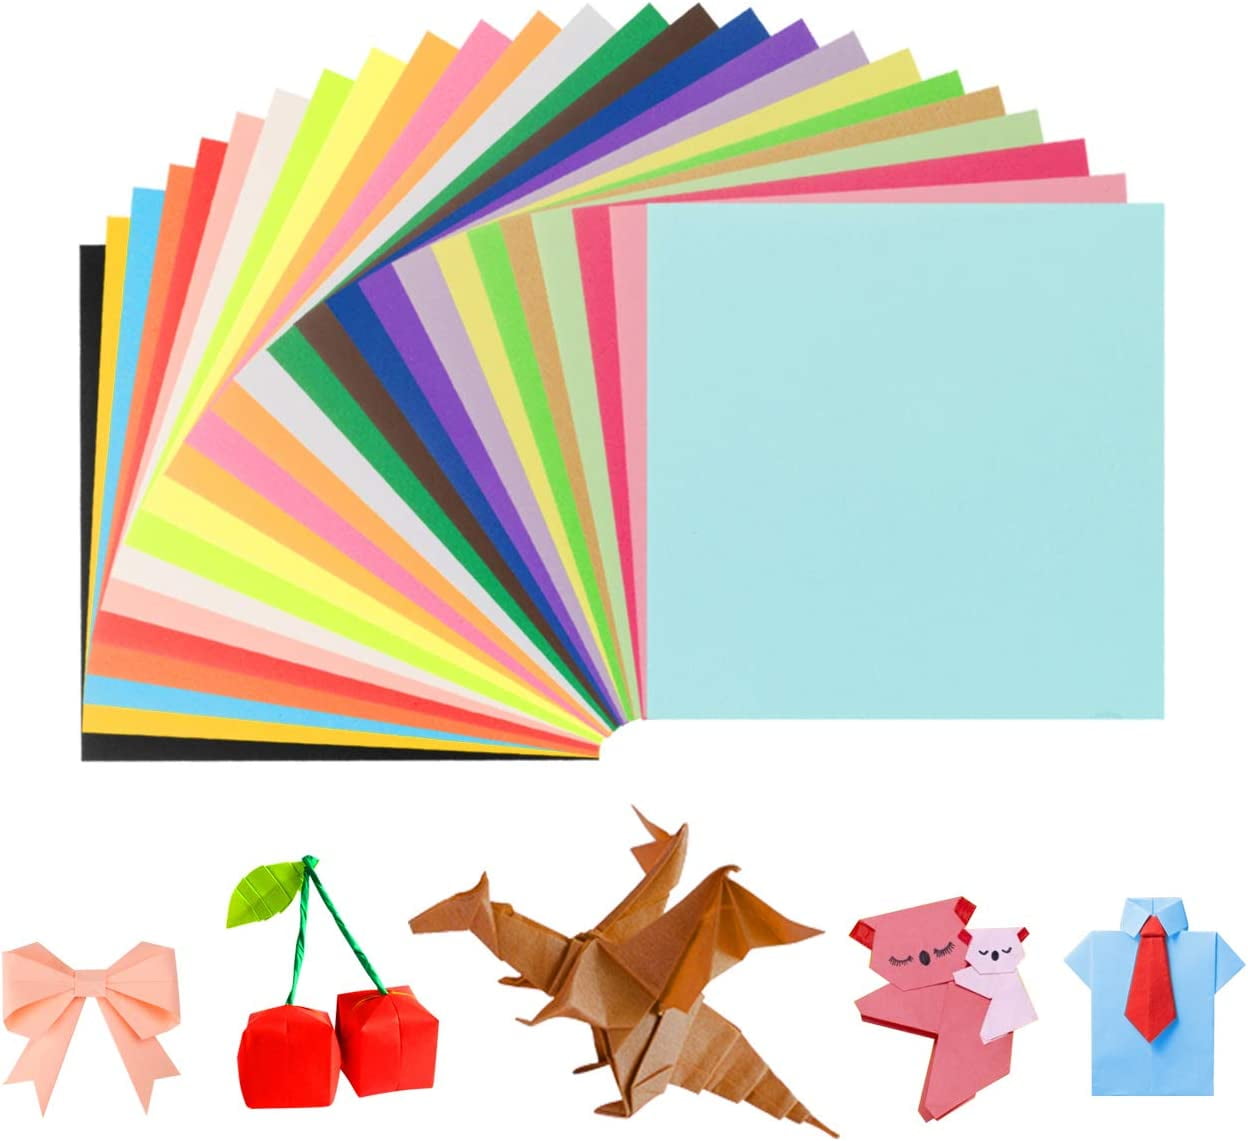 25 Pack Paper Square Shapes, Paper Square Cut Outs, Square Paper